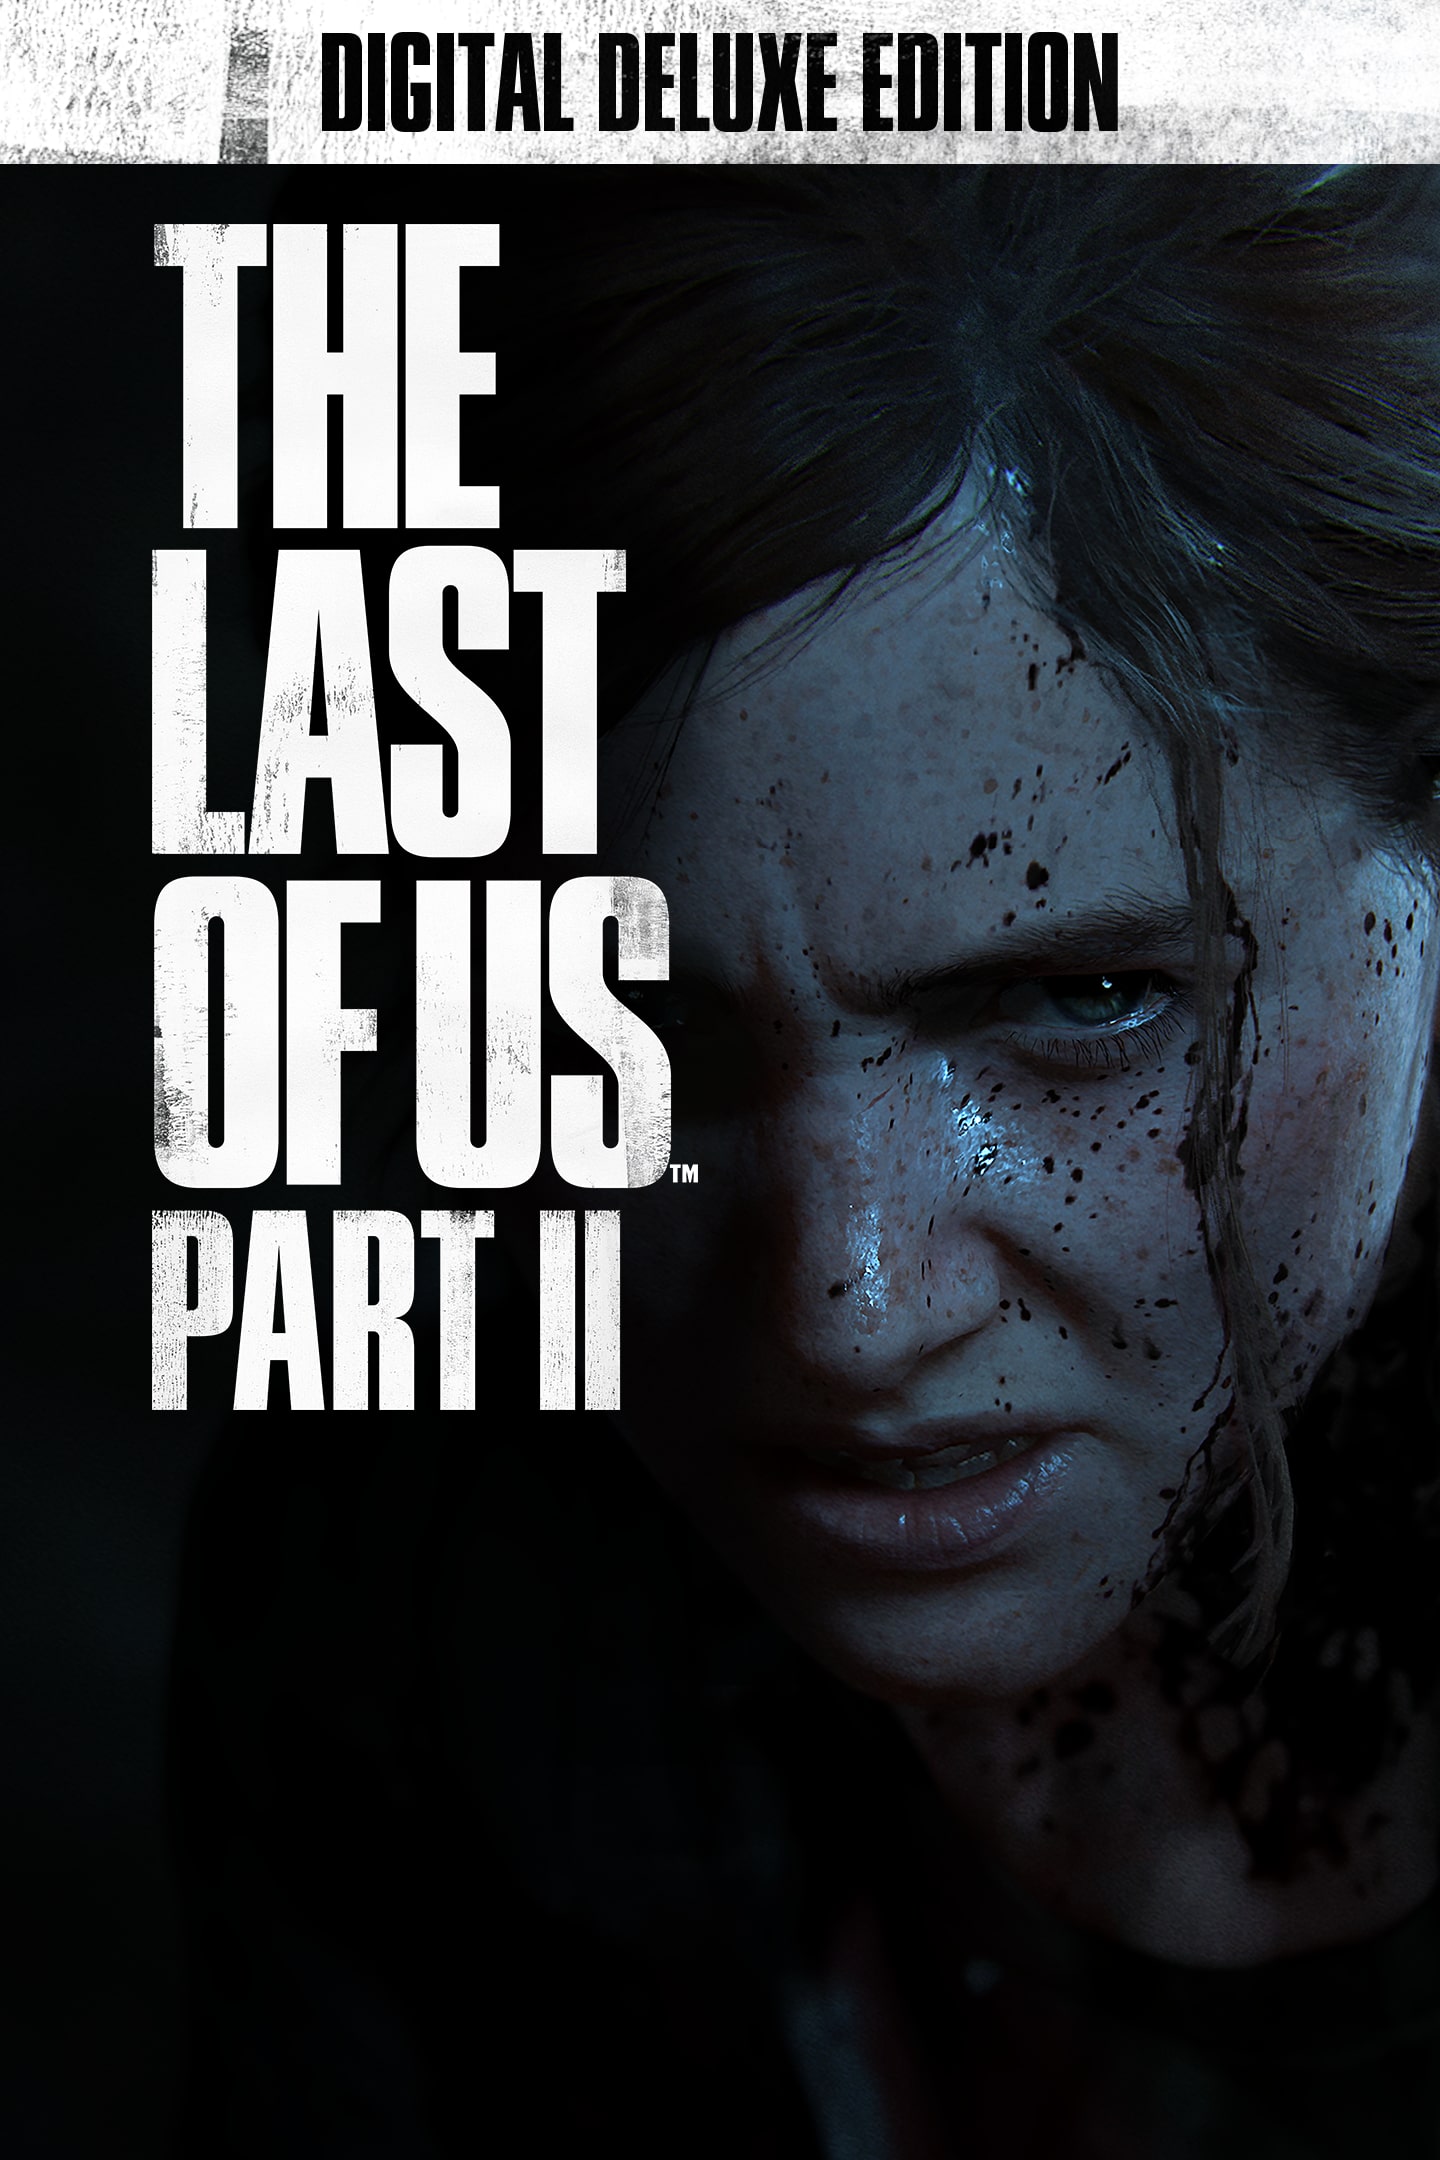 the last of us 2 pre order playstation store